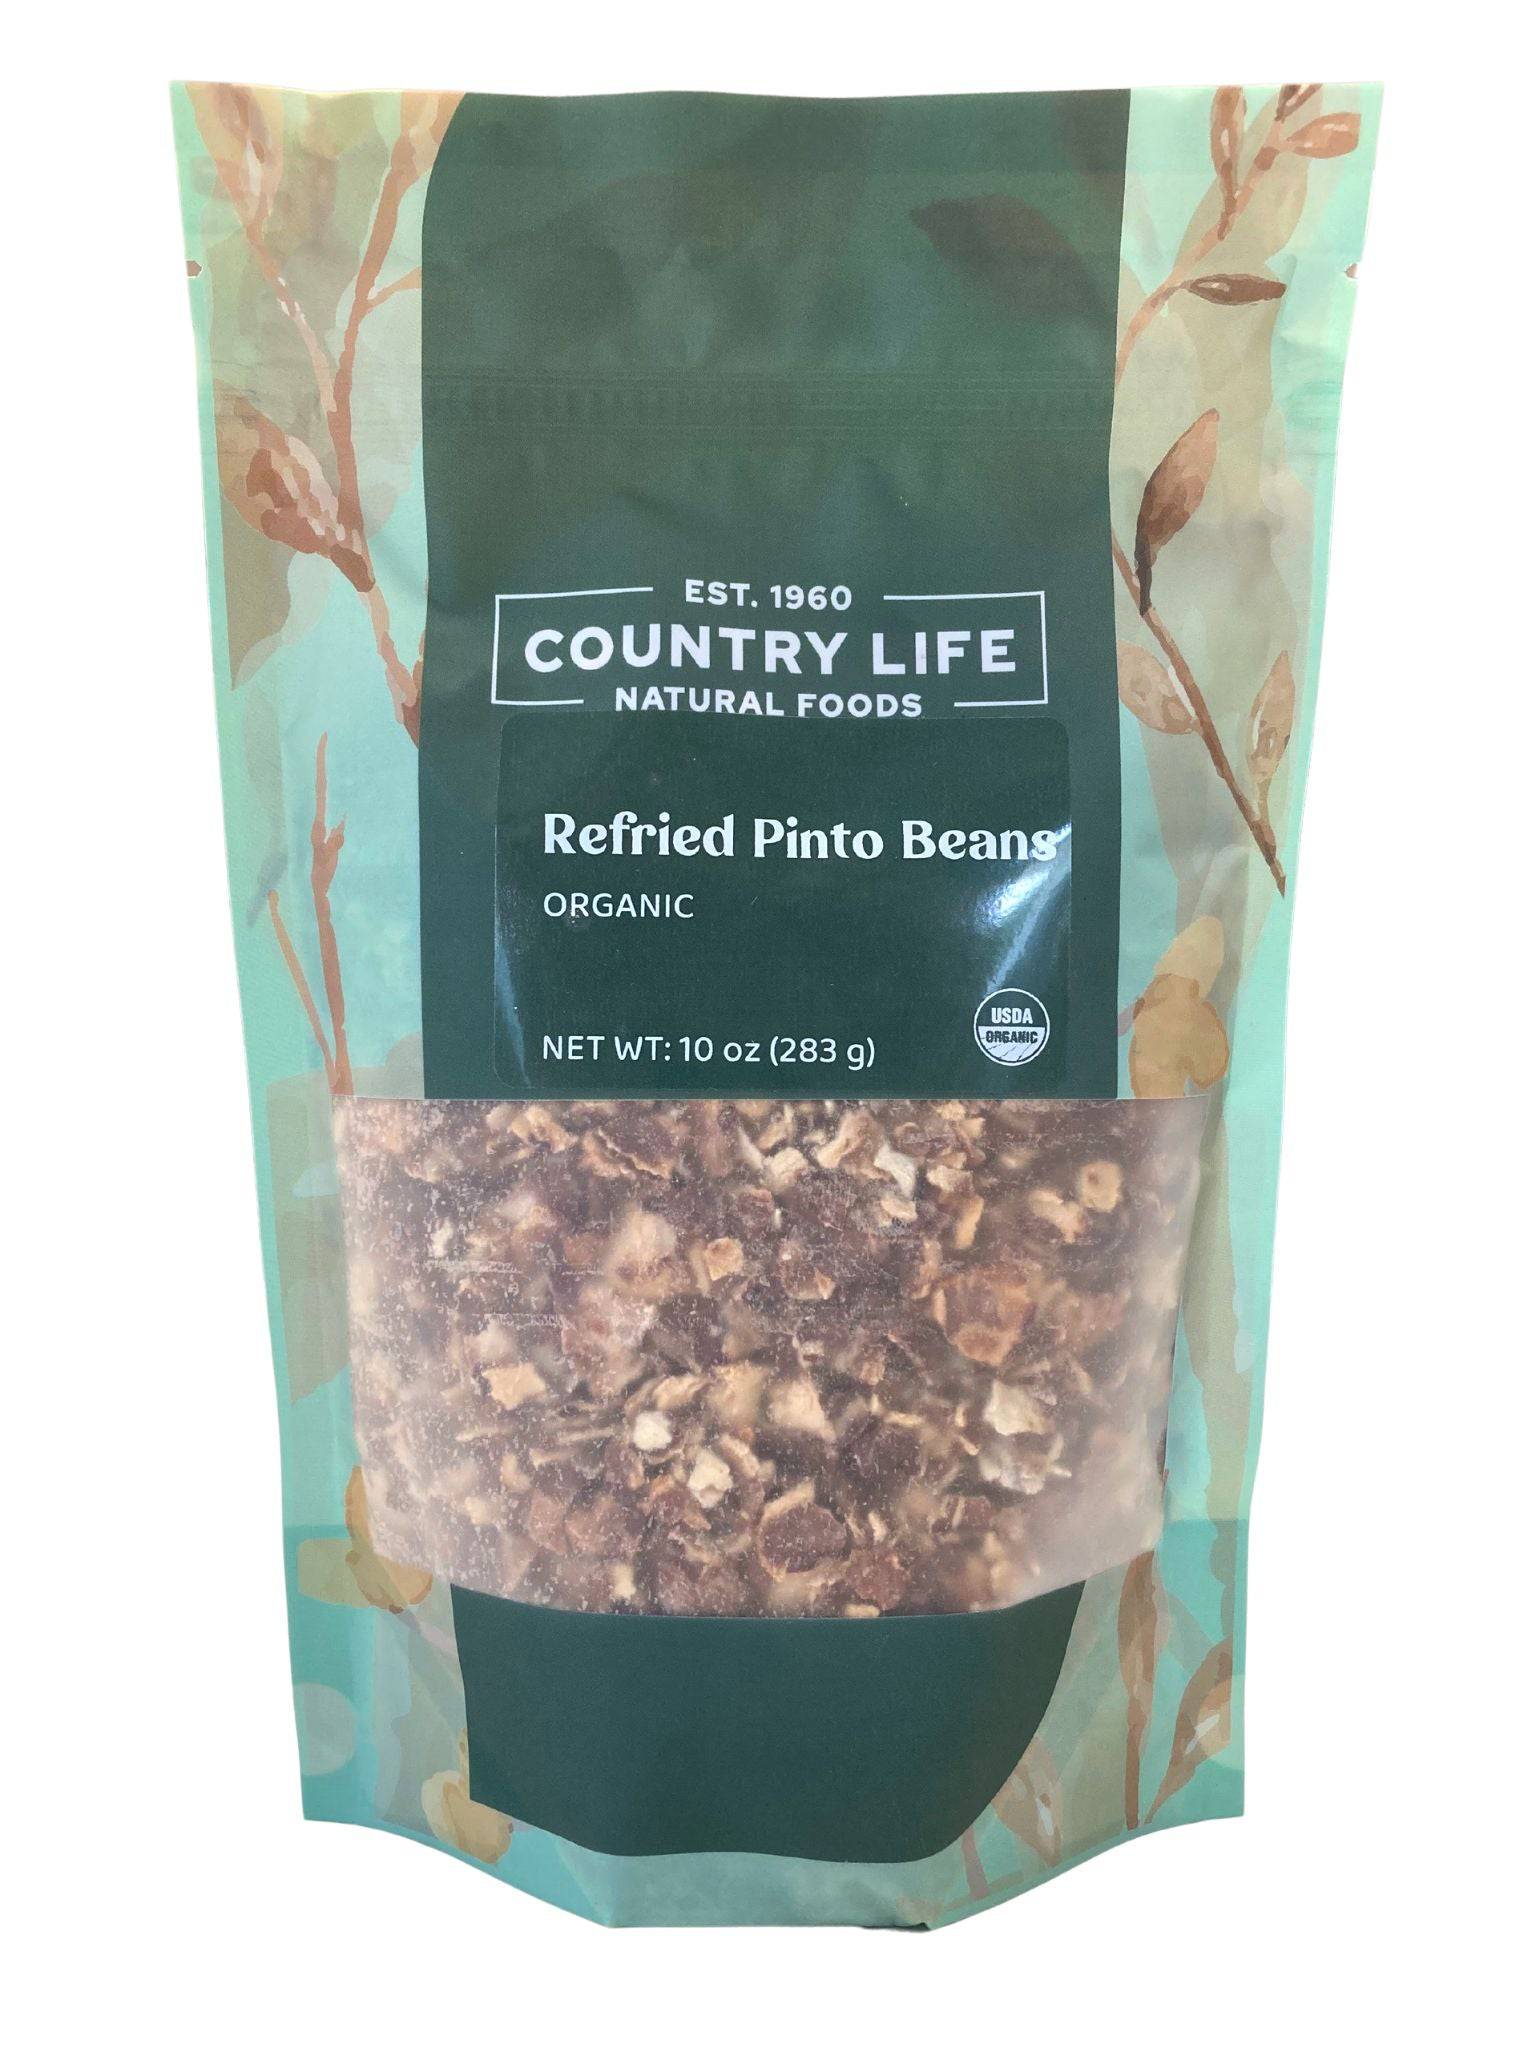 ORGANIC REFRIED PINTO BEANS